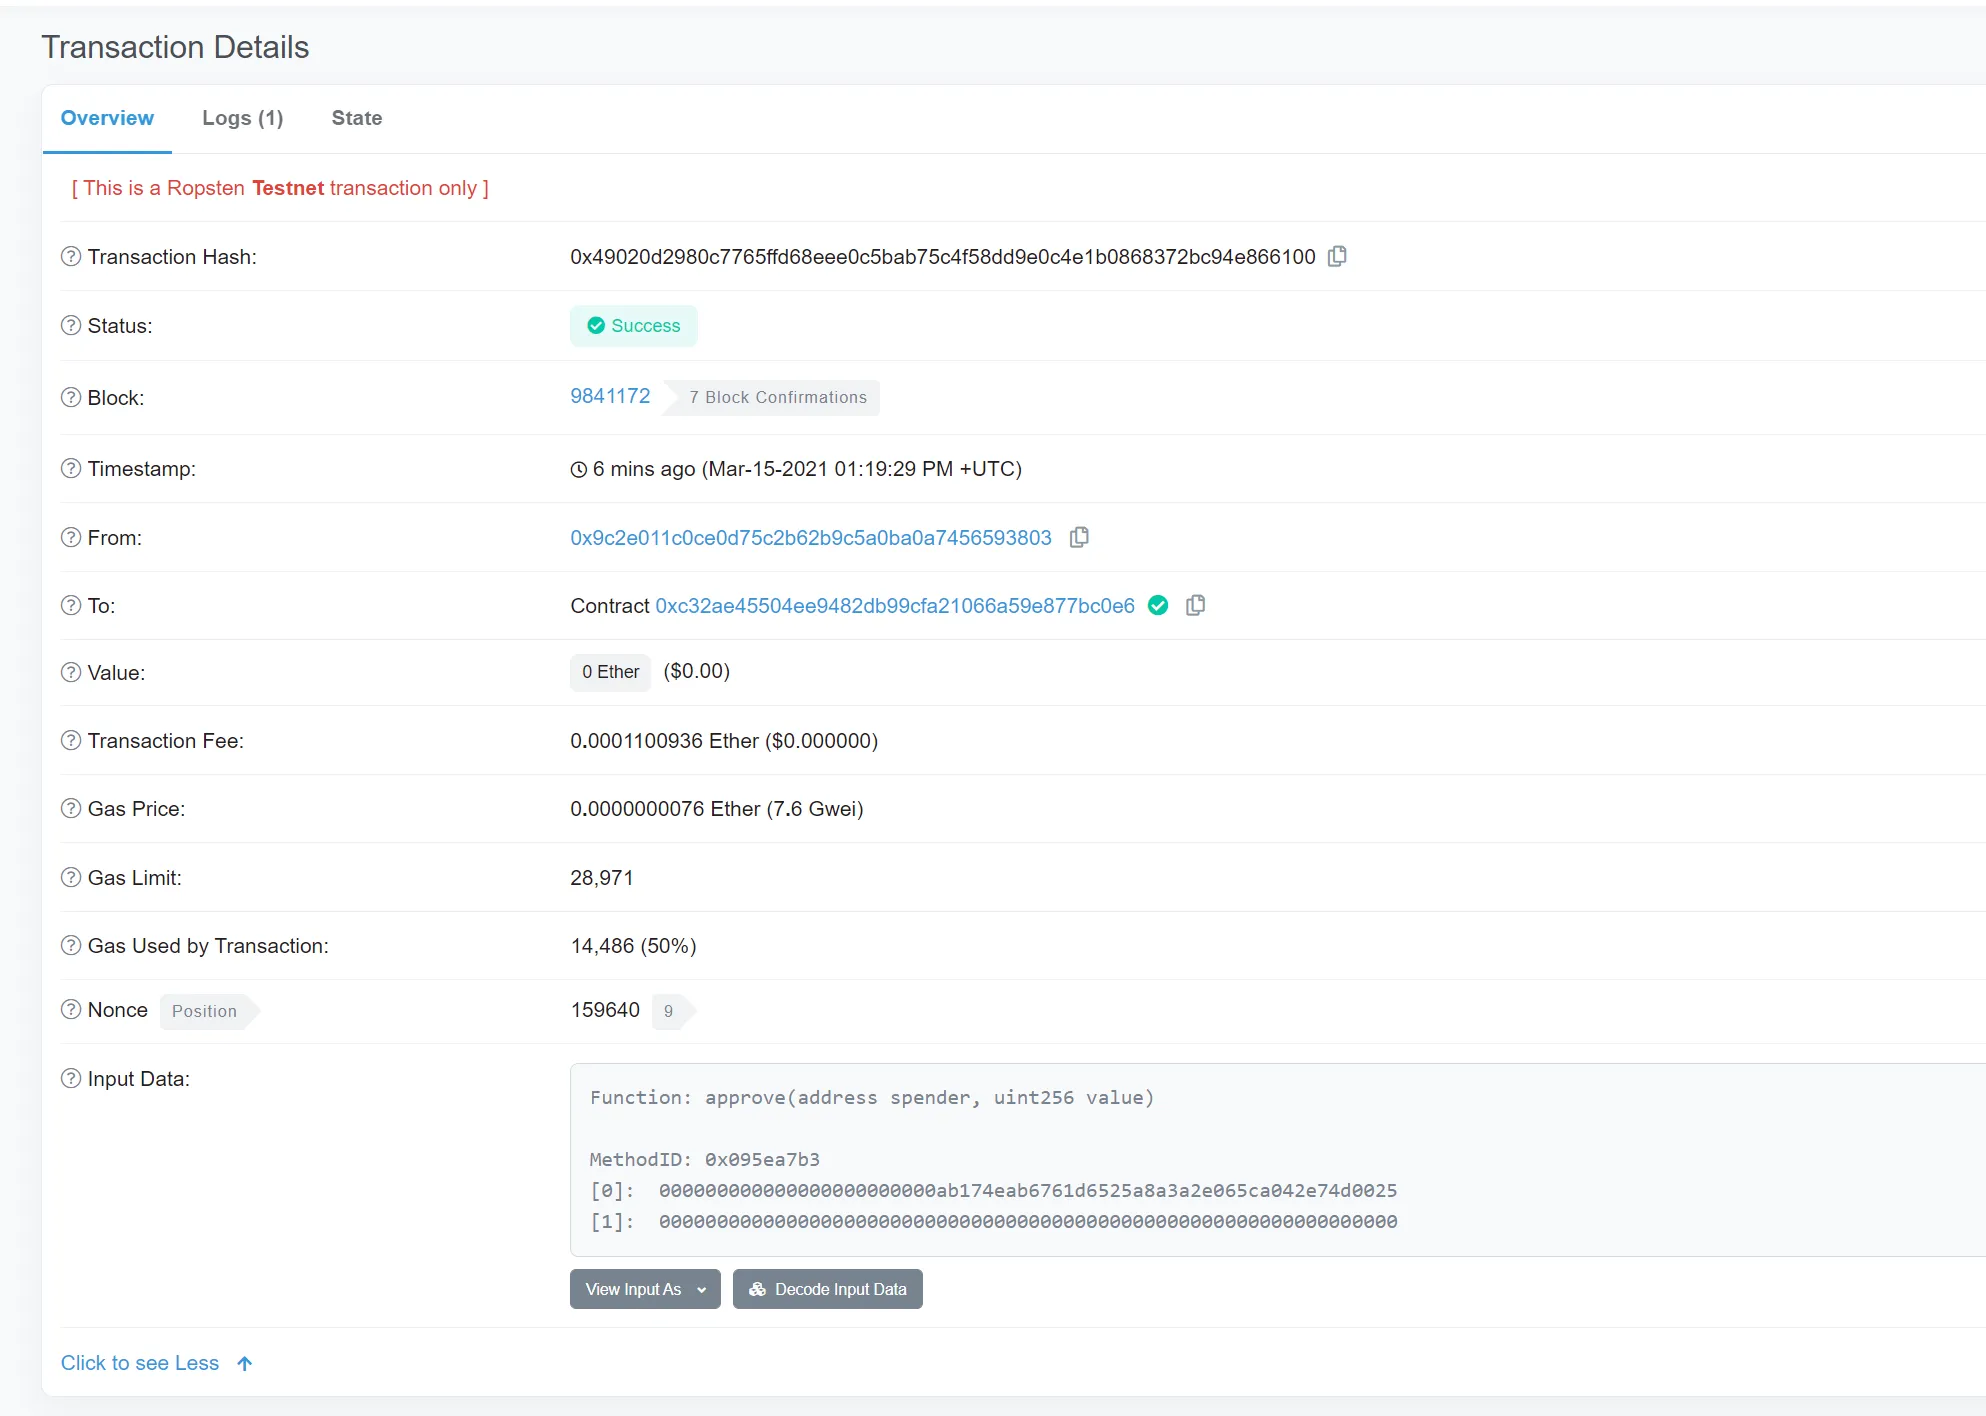 Complete data transaction as seen on Etherscan